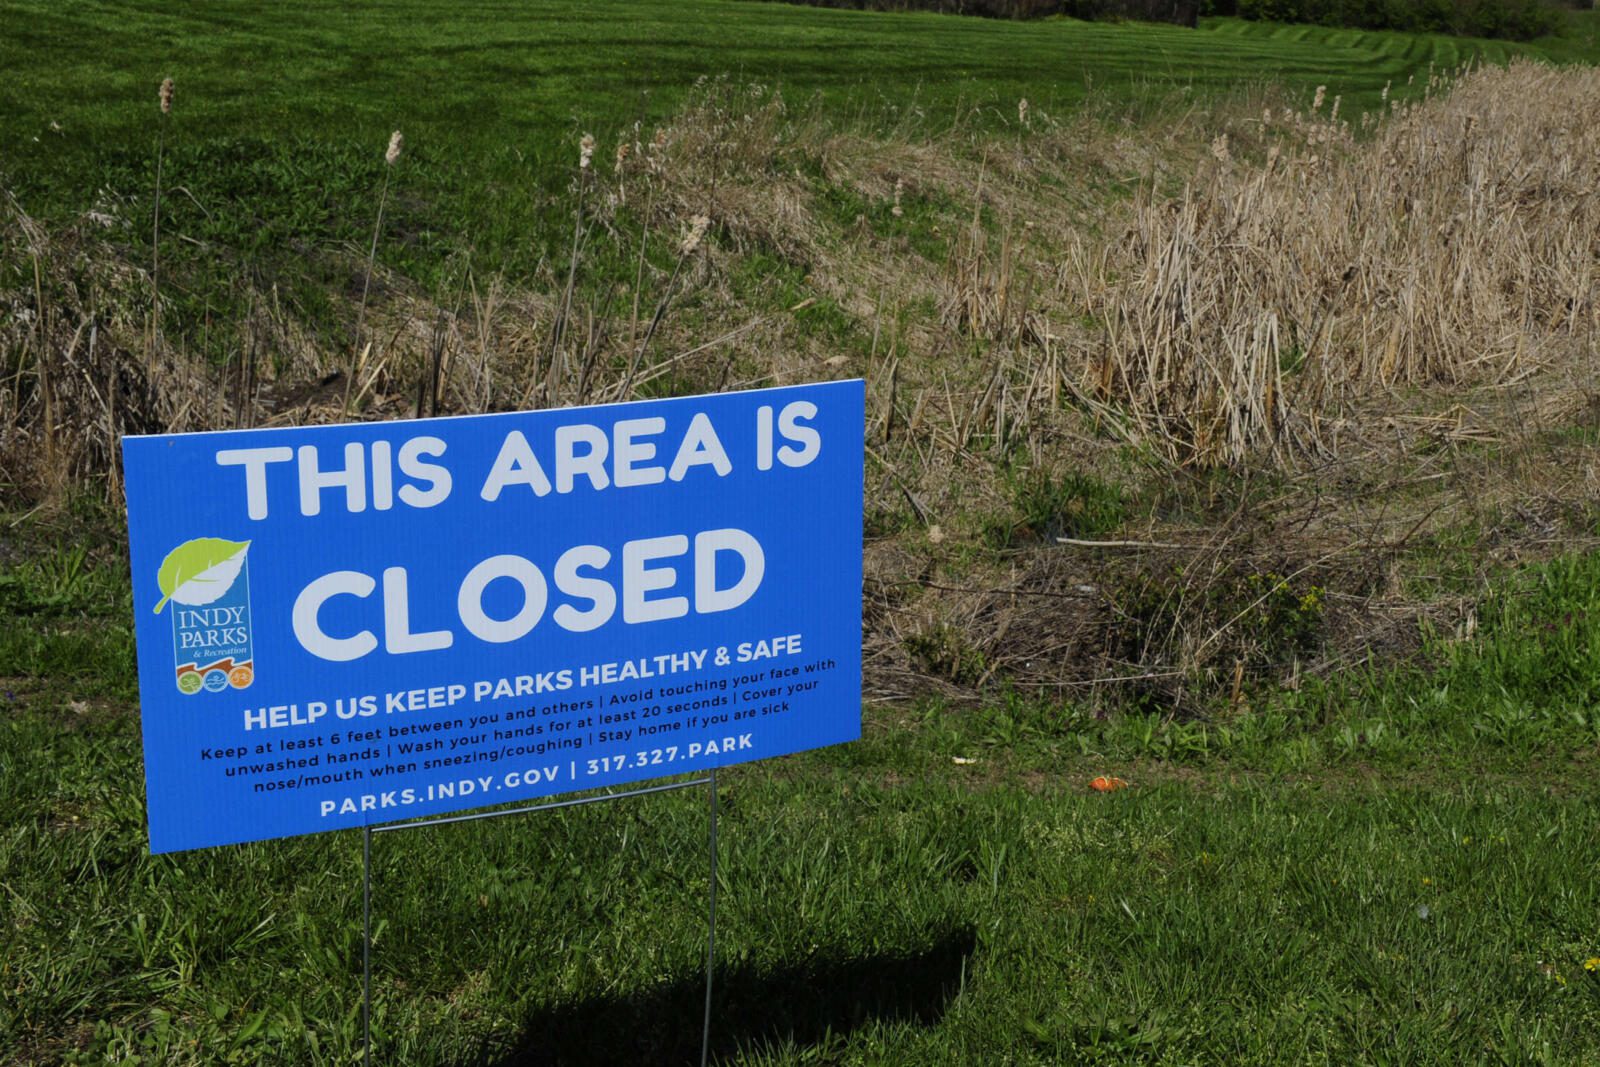 A sign indicating that a public area is now closed